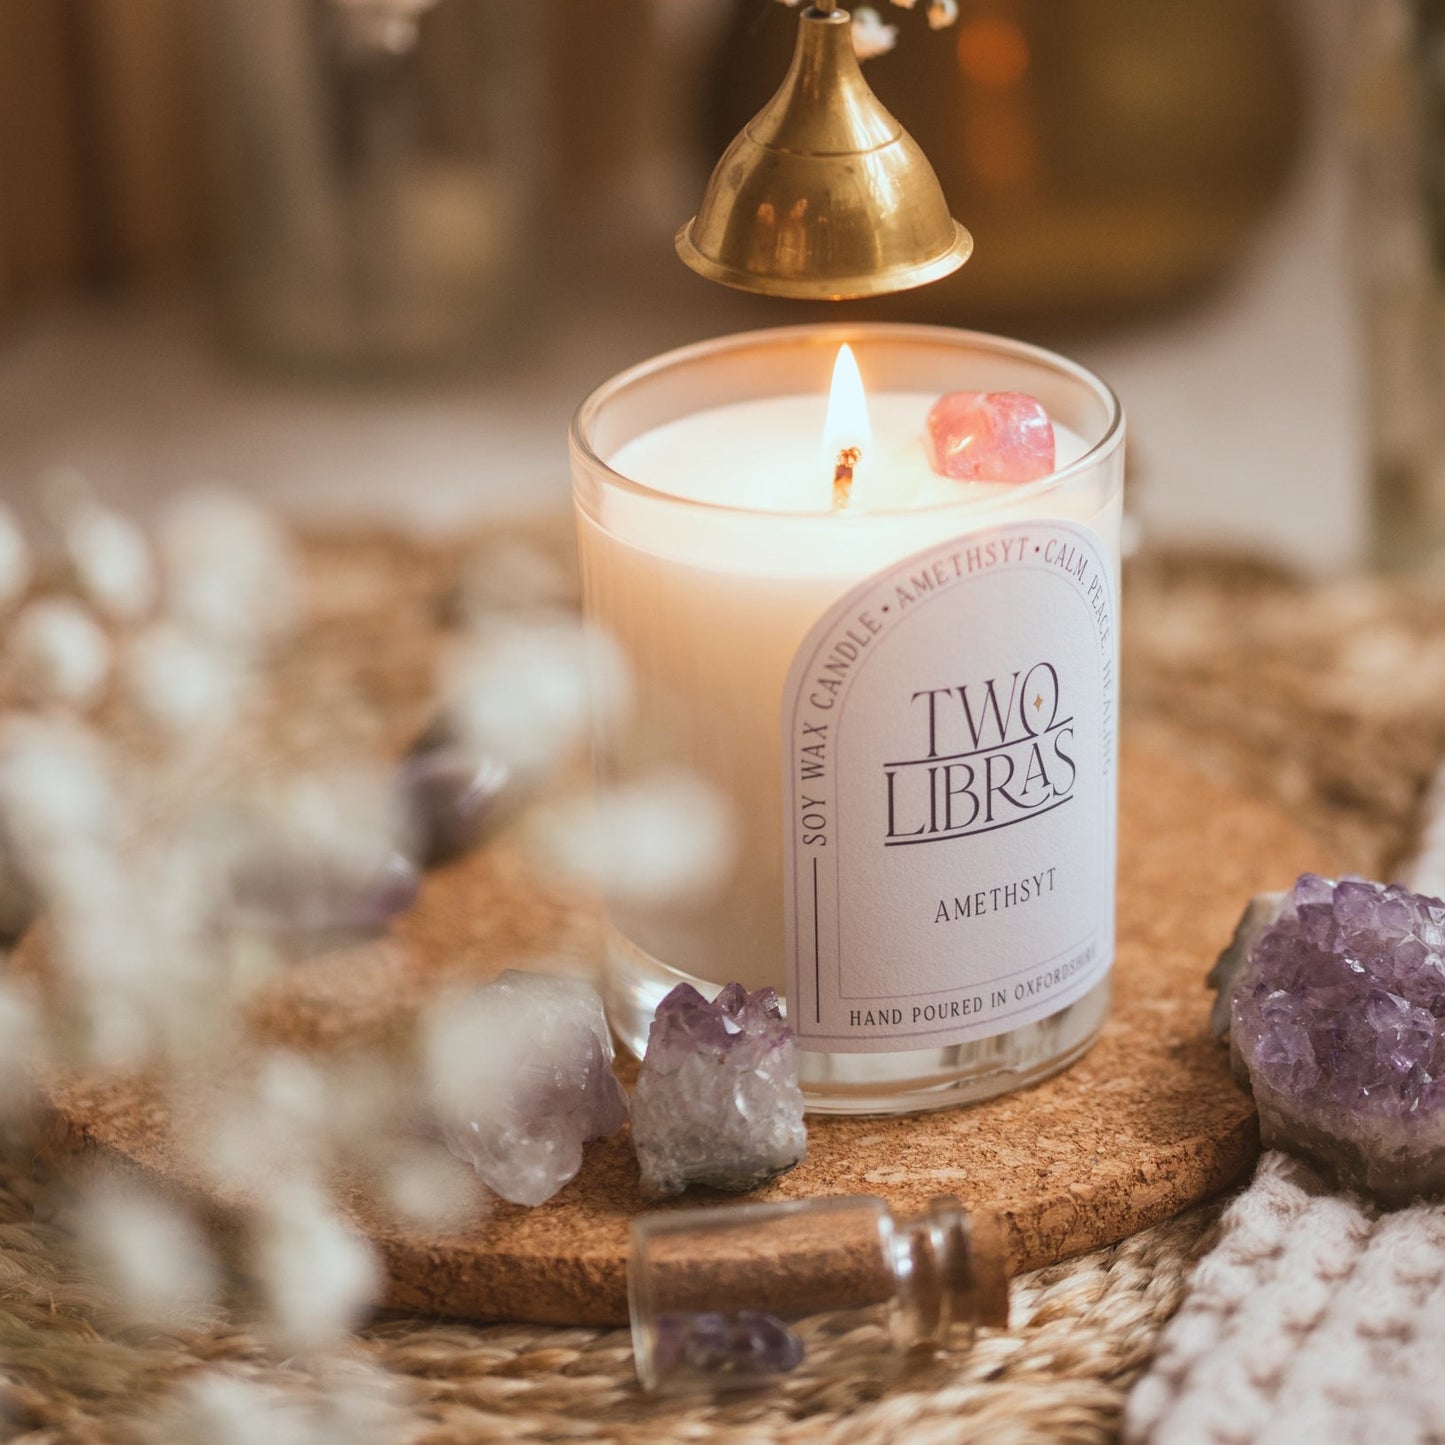 Amethyst Crystal Intention Candle - Calm, Peace, Healing